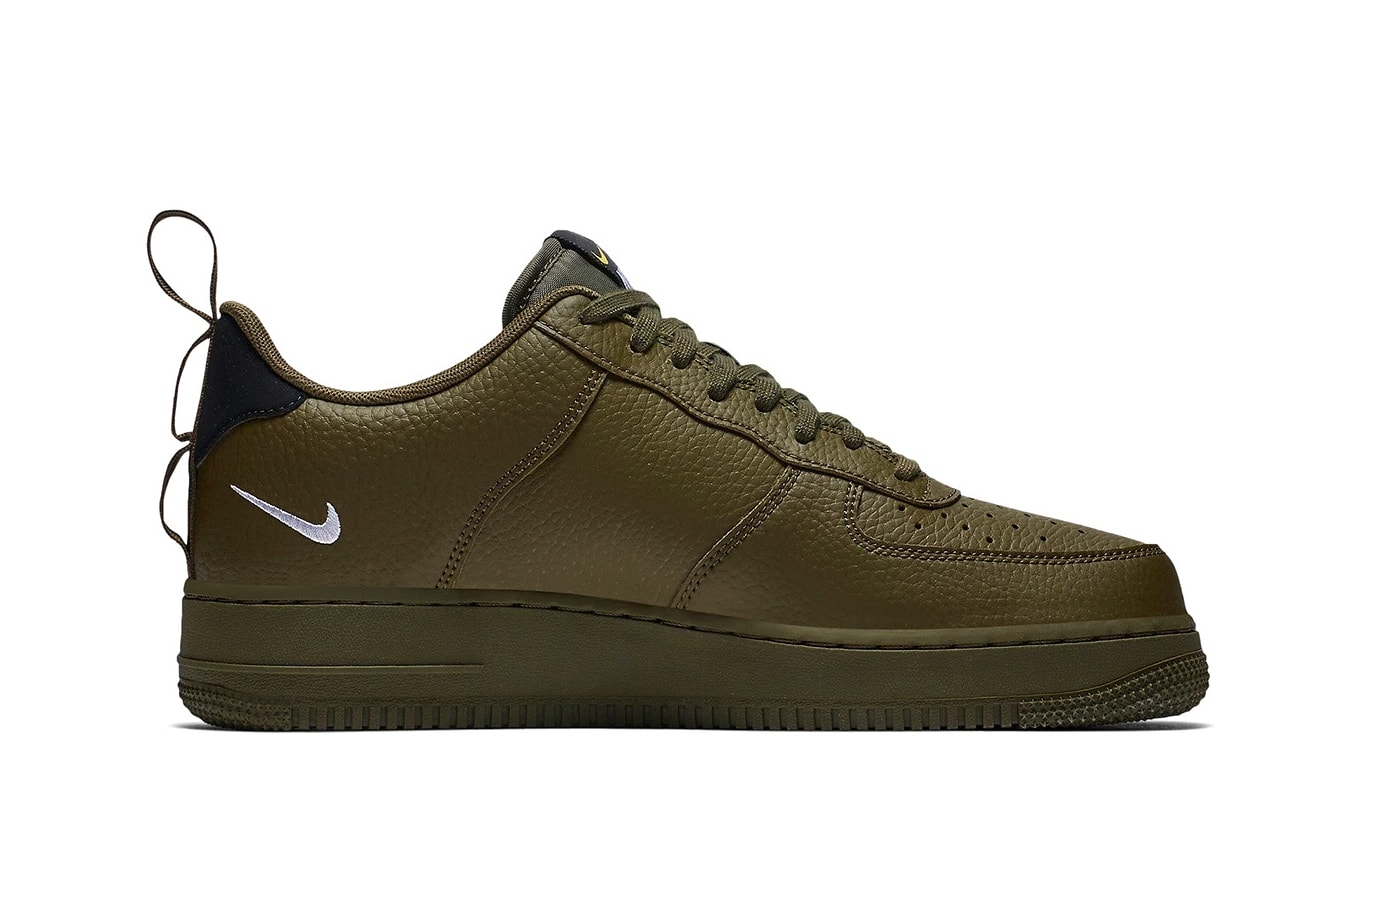 Nike Air Force 1 Low Utility Olive Canvas release info sneakers green leather sneakers